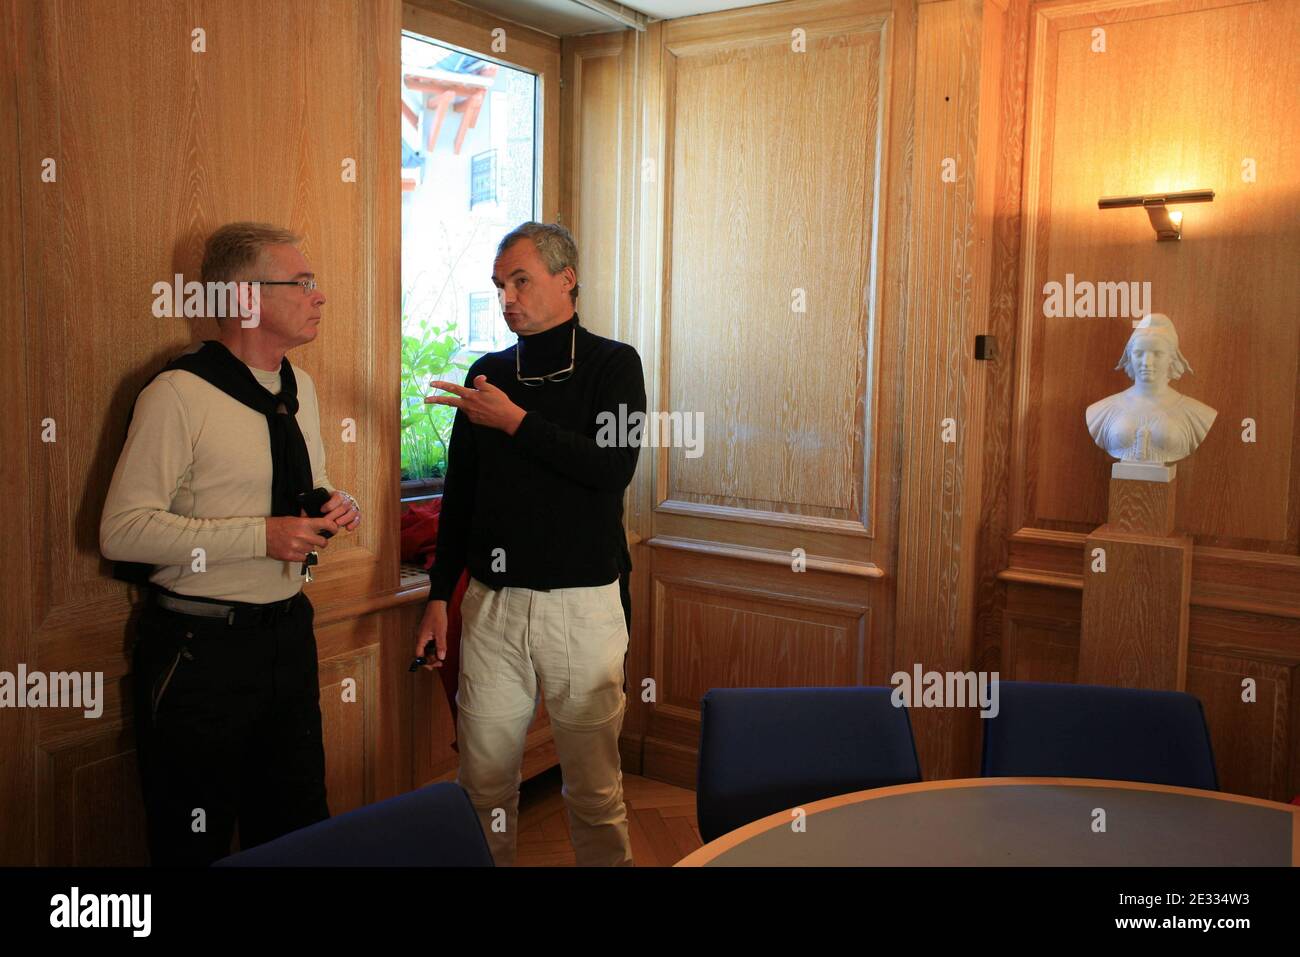 Jean-Luc Videlaine (R), the prefet of Haute-Savoie region and Saint-Gervais mayor Jean-Marc Peillex discuss the situation regarding the Tete-Rousse glacier, at the city hall of Saint-Gervais, southeastern France on August 25, 2010. French engineers began an operation to remove 65,000 cubic meters of water underneath the Tete-Rousse glacier on Mont Blanc. The hidden lake threatens to flood the Saint-Gervais valley, a tourist destination and home to 3,000 people in the French Alps. The engineers are drilling a hole into the ice to pump out the water. In 1892, water from an underground lake flood Stock Photo